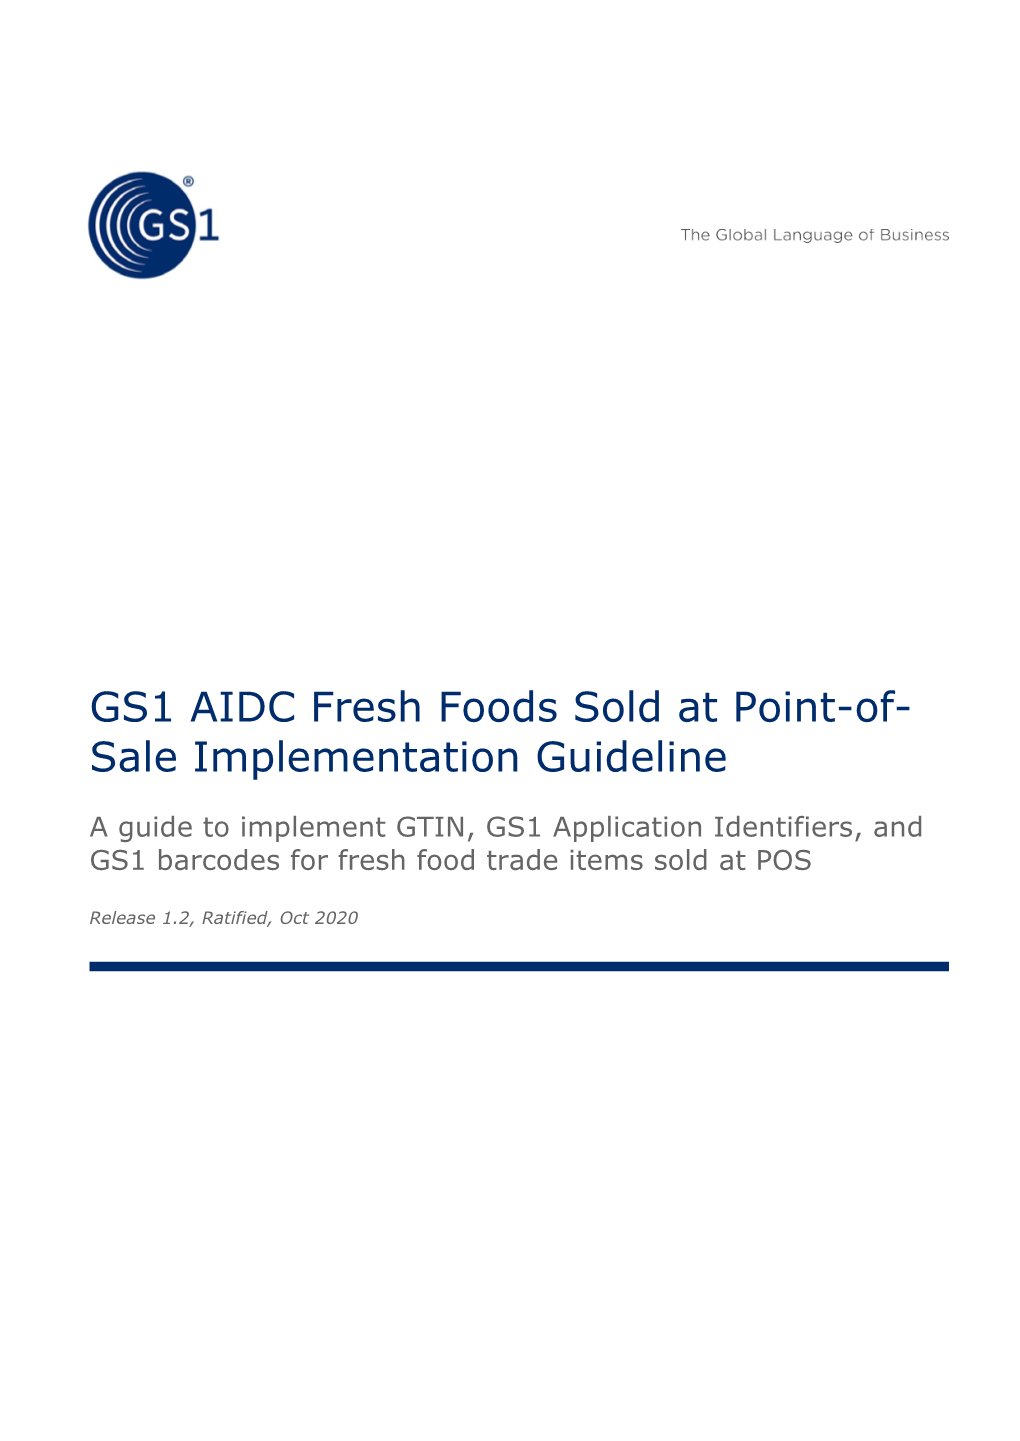 GS1 AIDC Fresh Foods Sold at Point-Of-Sale Implementation Guideline